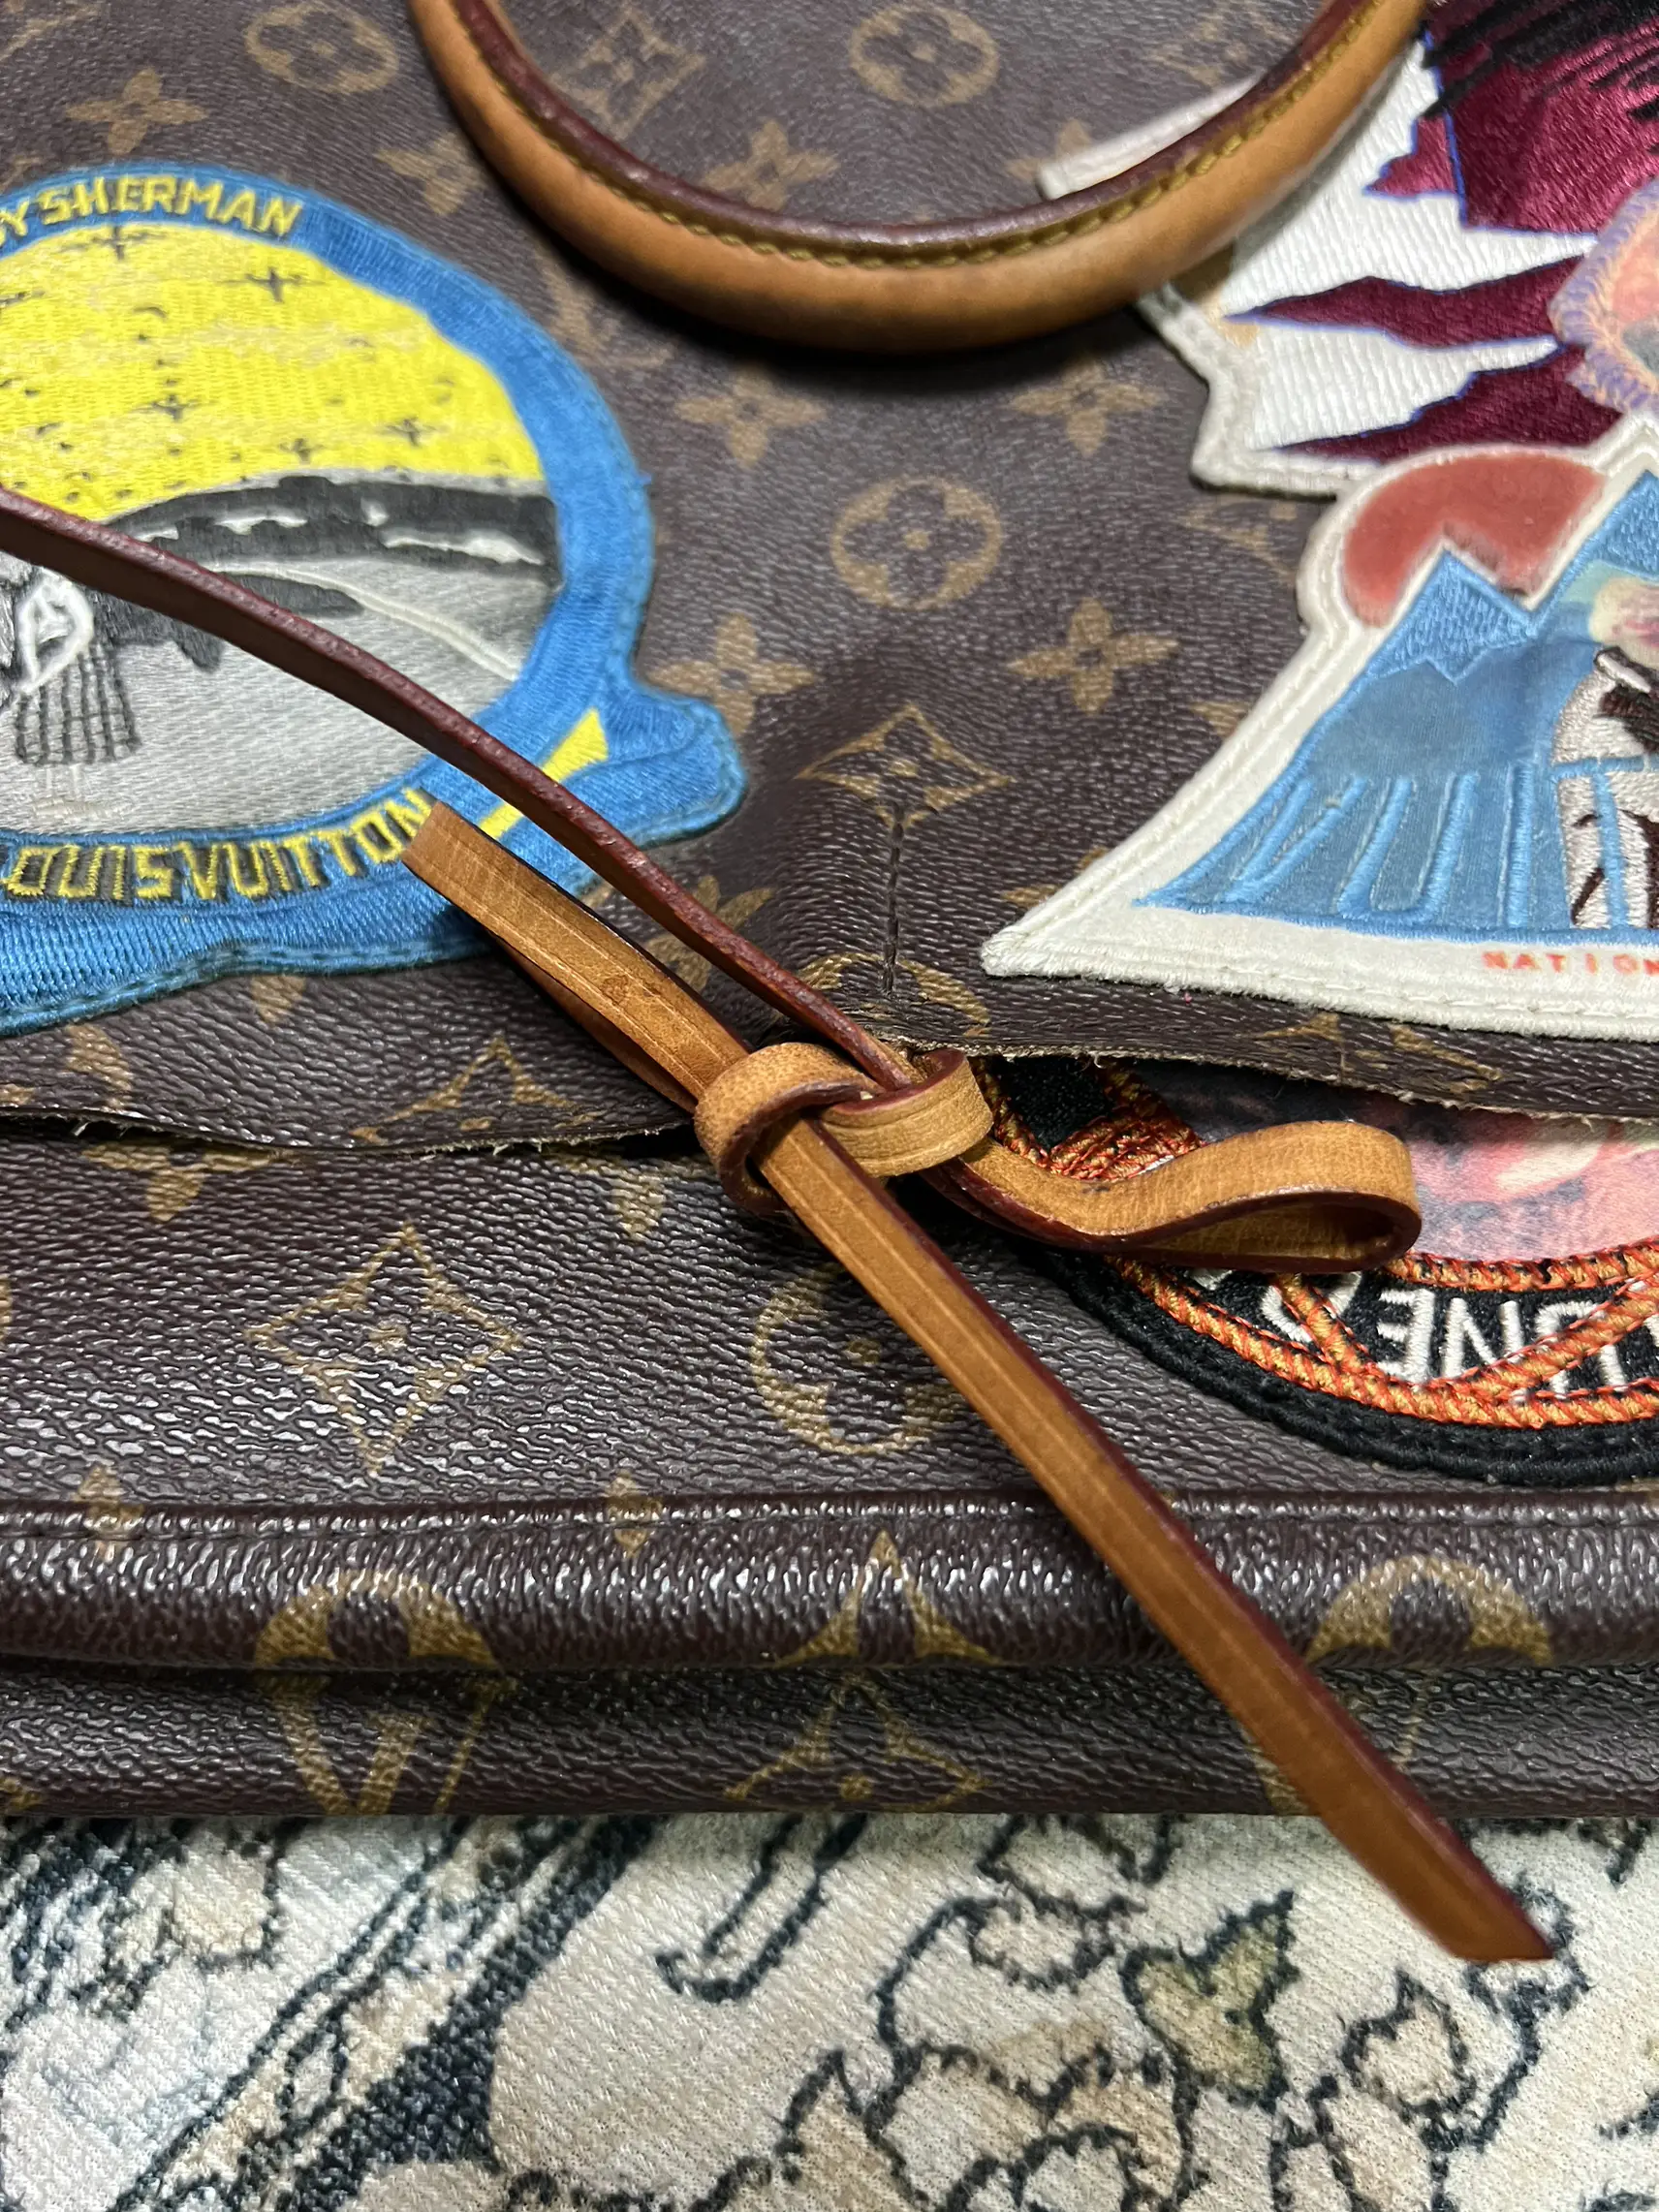 Authentic Louis Vuitton Cindy Sherman Camera Bag, Gallery posted by Cooper  SZ